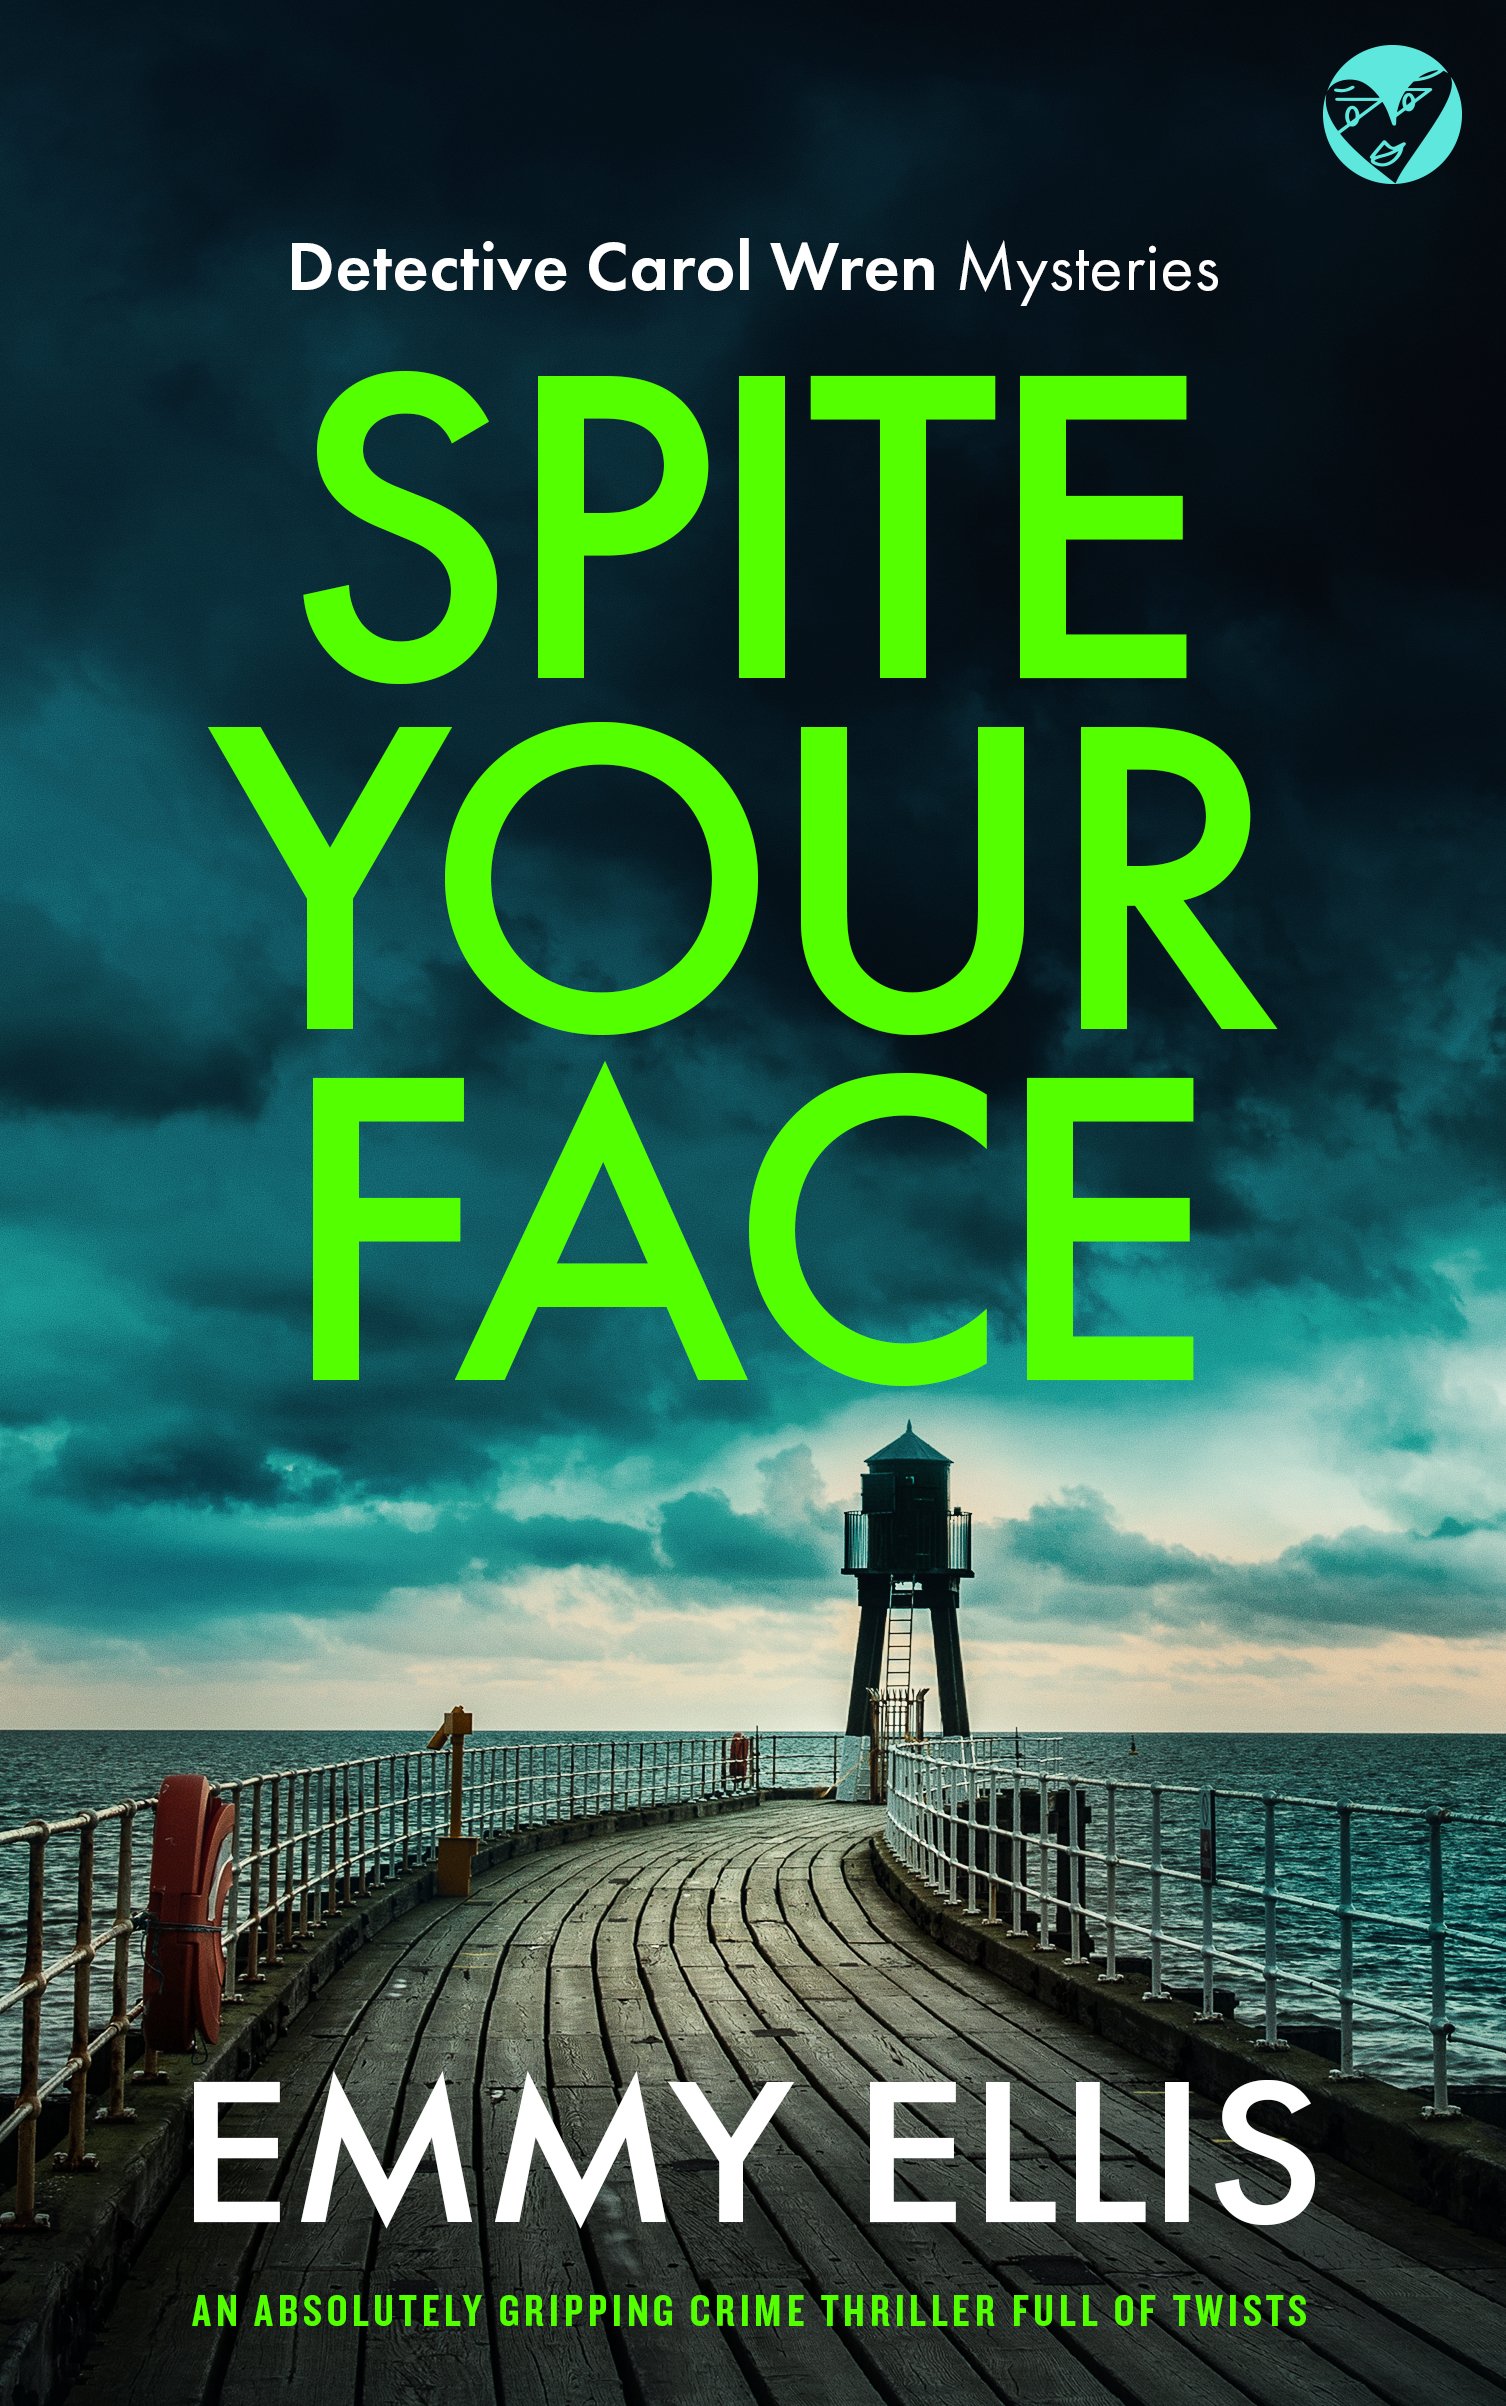 SPITE YOUR FACE Cover publish.jpg